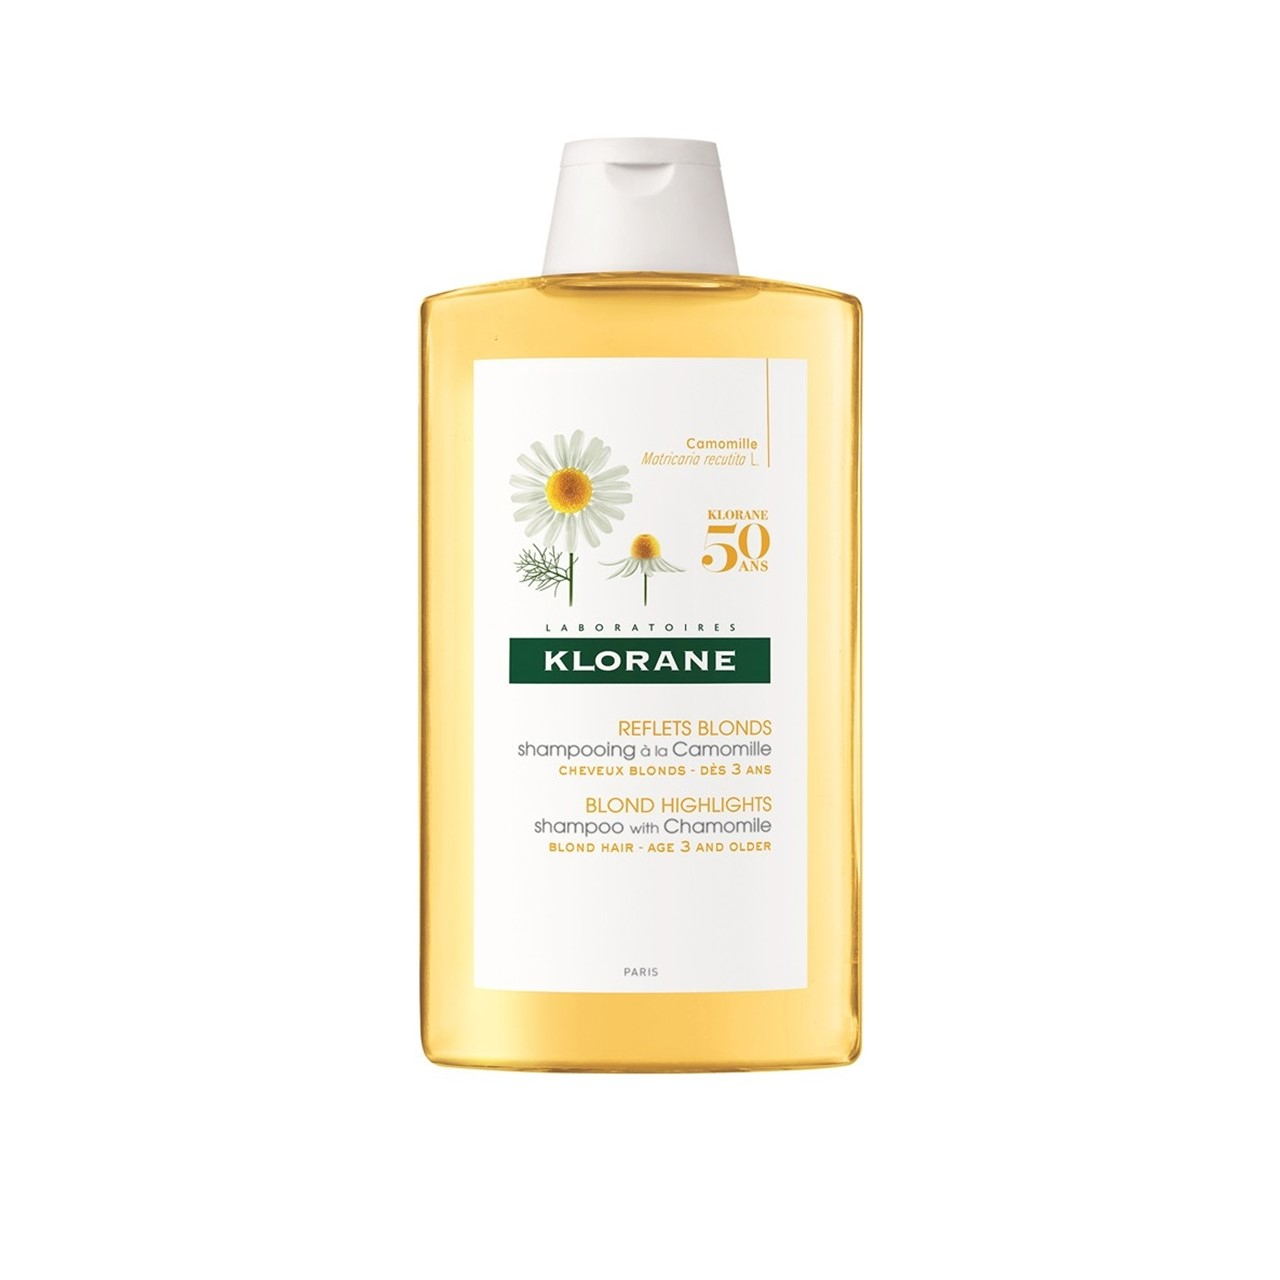 childrens-shampoo-blond-highlights-with-natural-camomile-extract